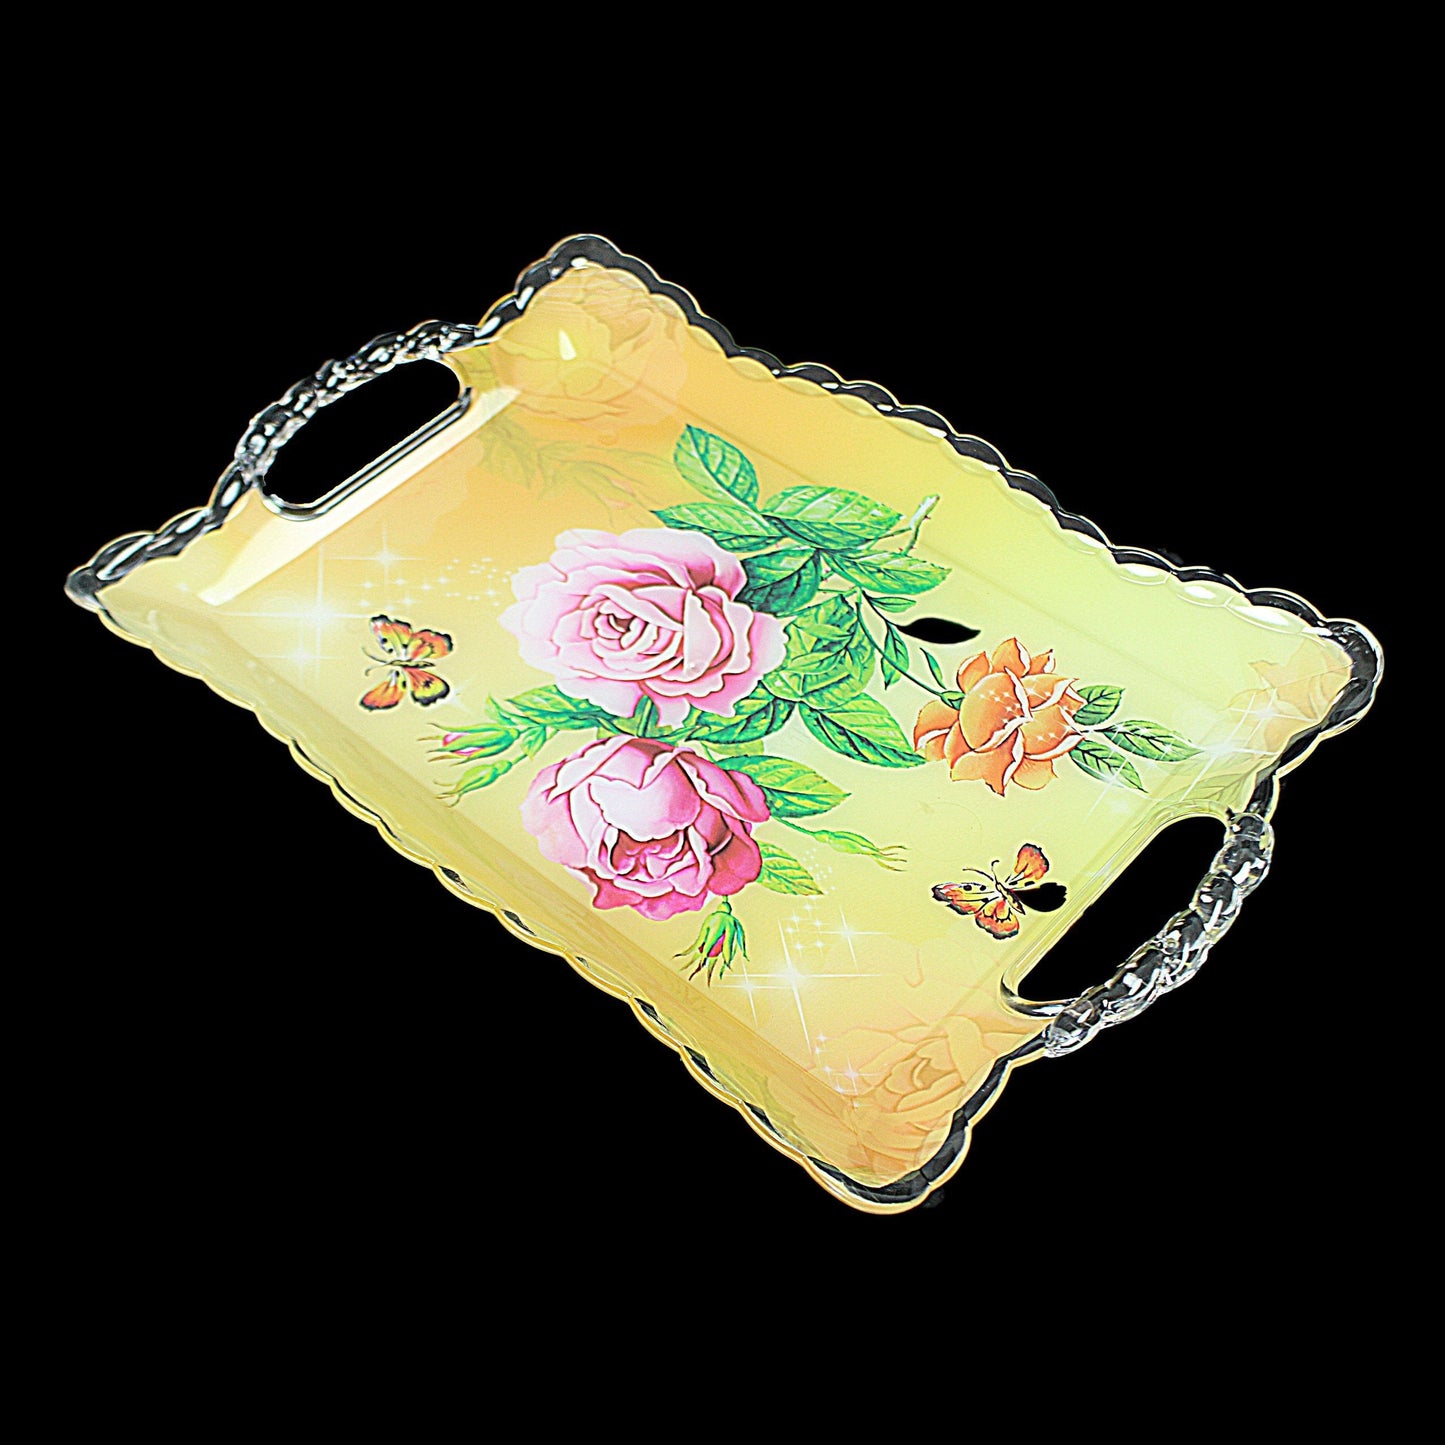 Plastic Floral Printed Serving Tray 40cm x 25cm Assorted Colours and Designs 0727 (Parcel Rate)